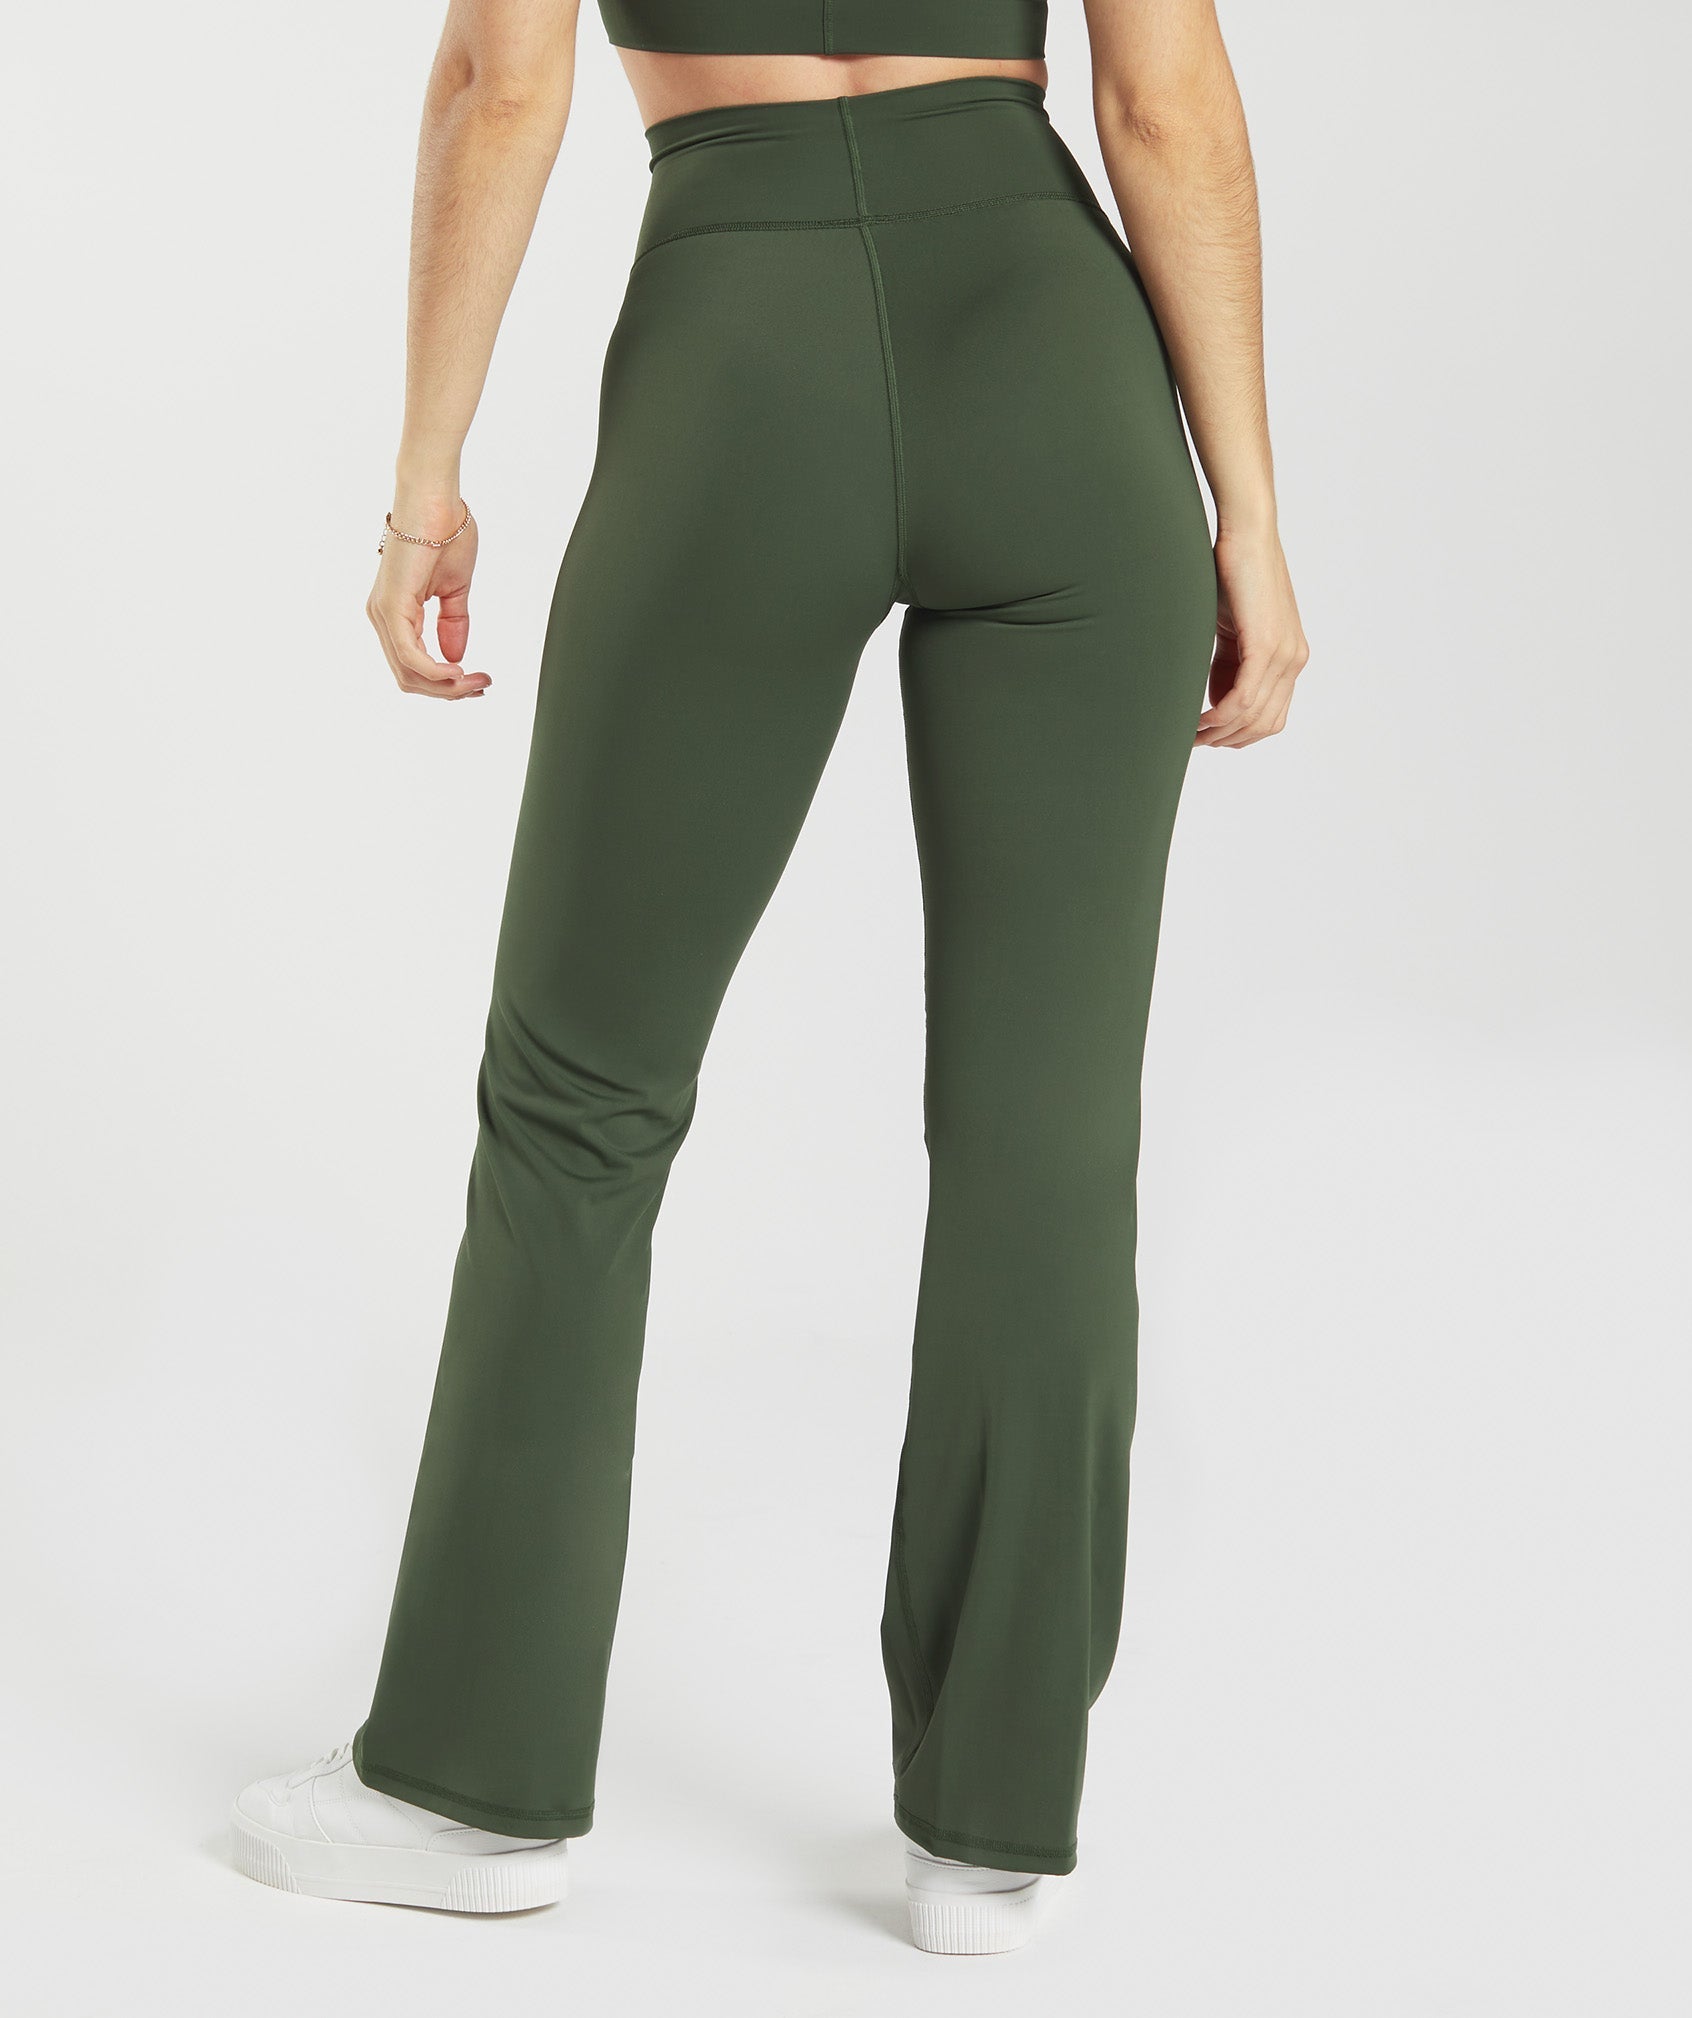 Elevate Flared Leggings in Moss Olive - view 3